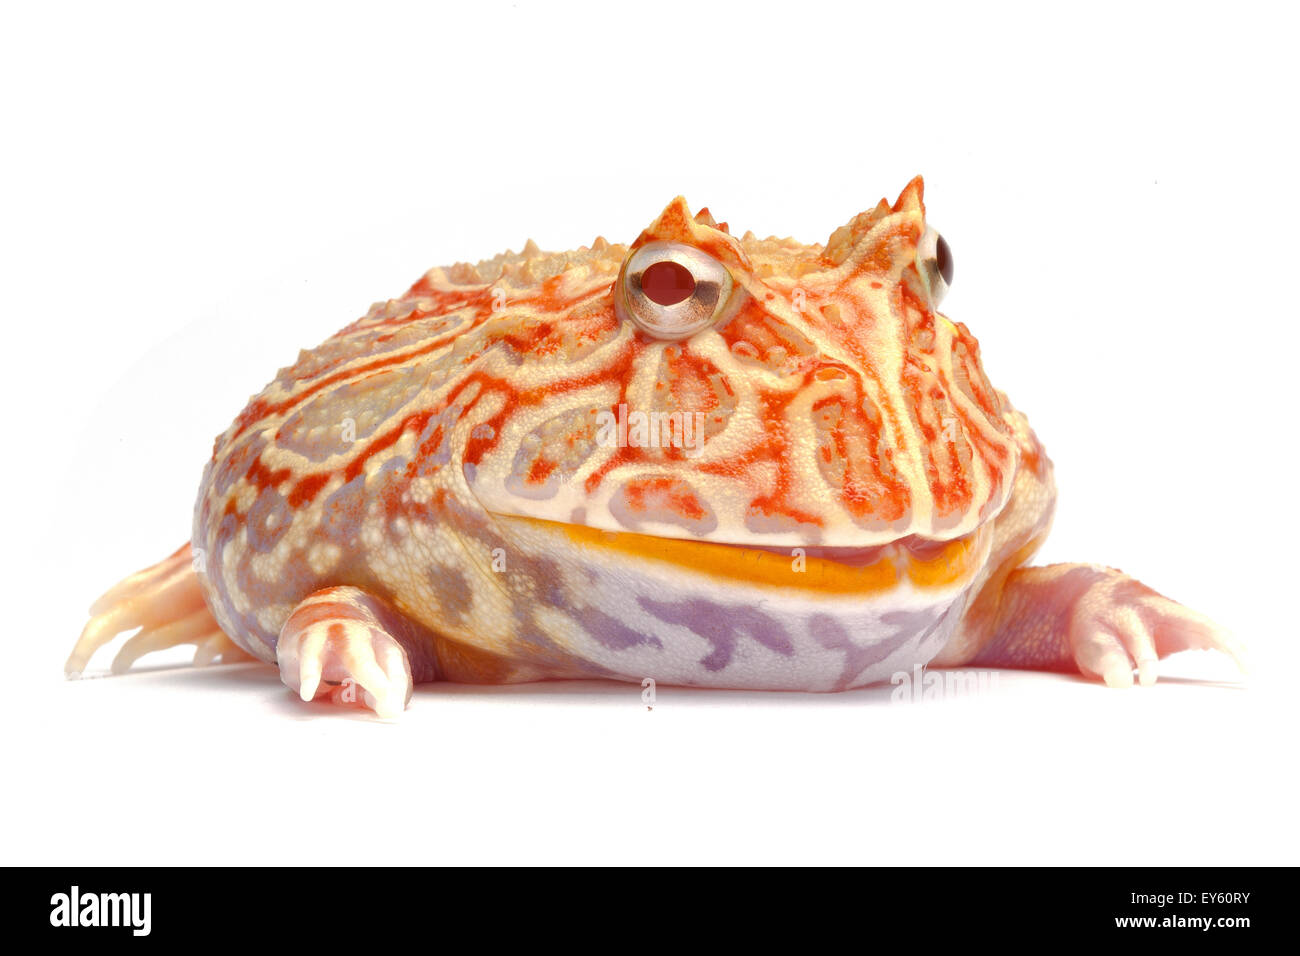 Chacoan Horned Frog 'extreme red' on white background Stock Photo